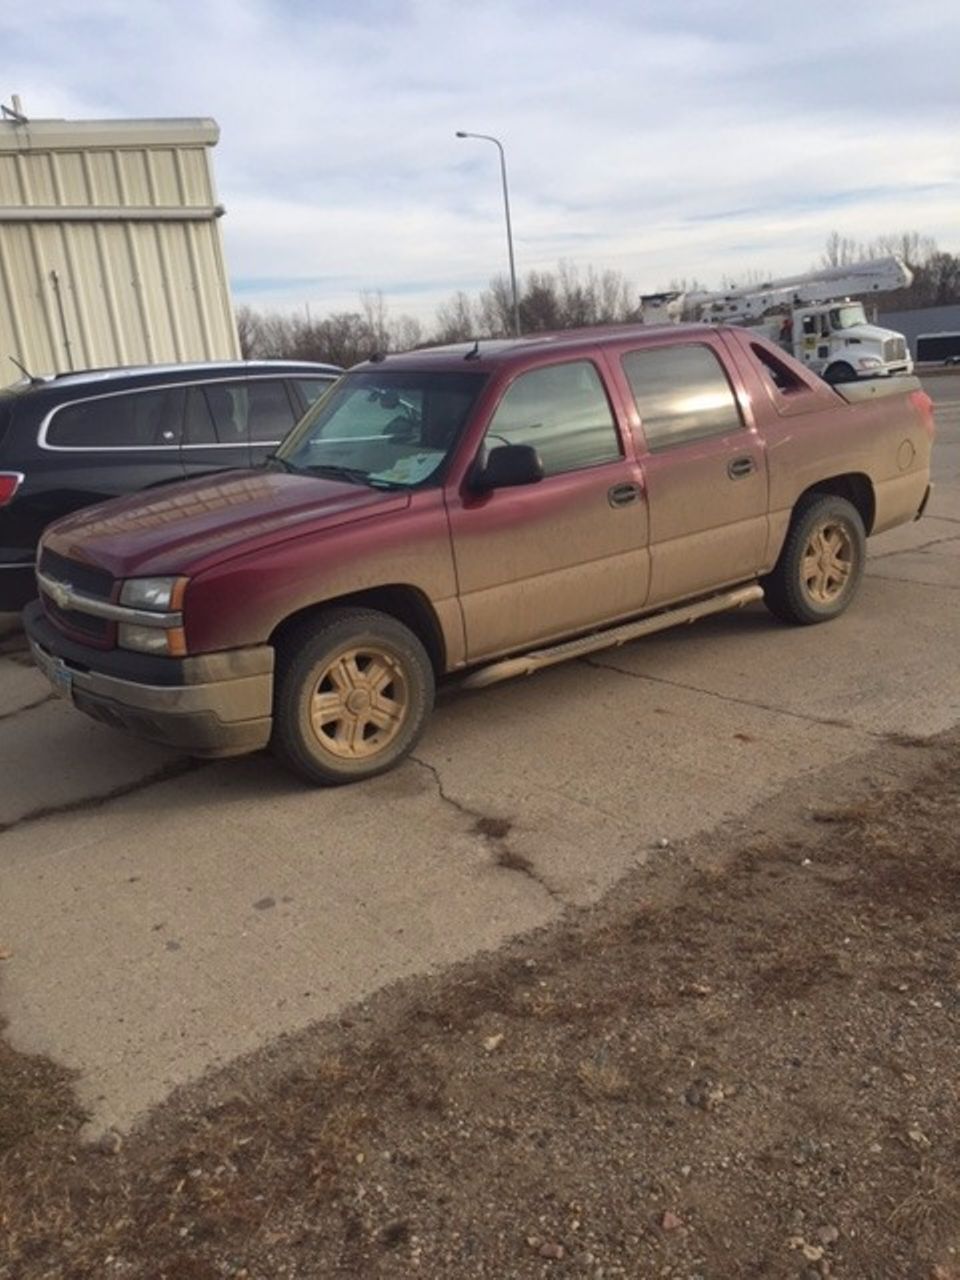 2004 Chevrolet Avalanche 1500 | Canton, SD, Victory Red (Red & Orange), 4 Wheel